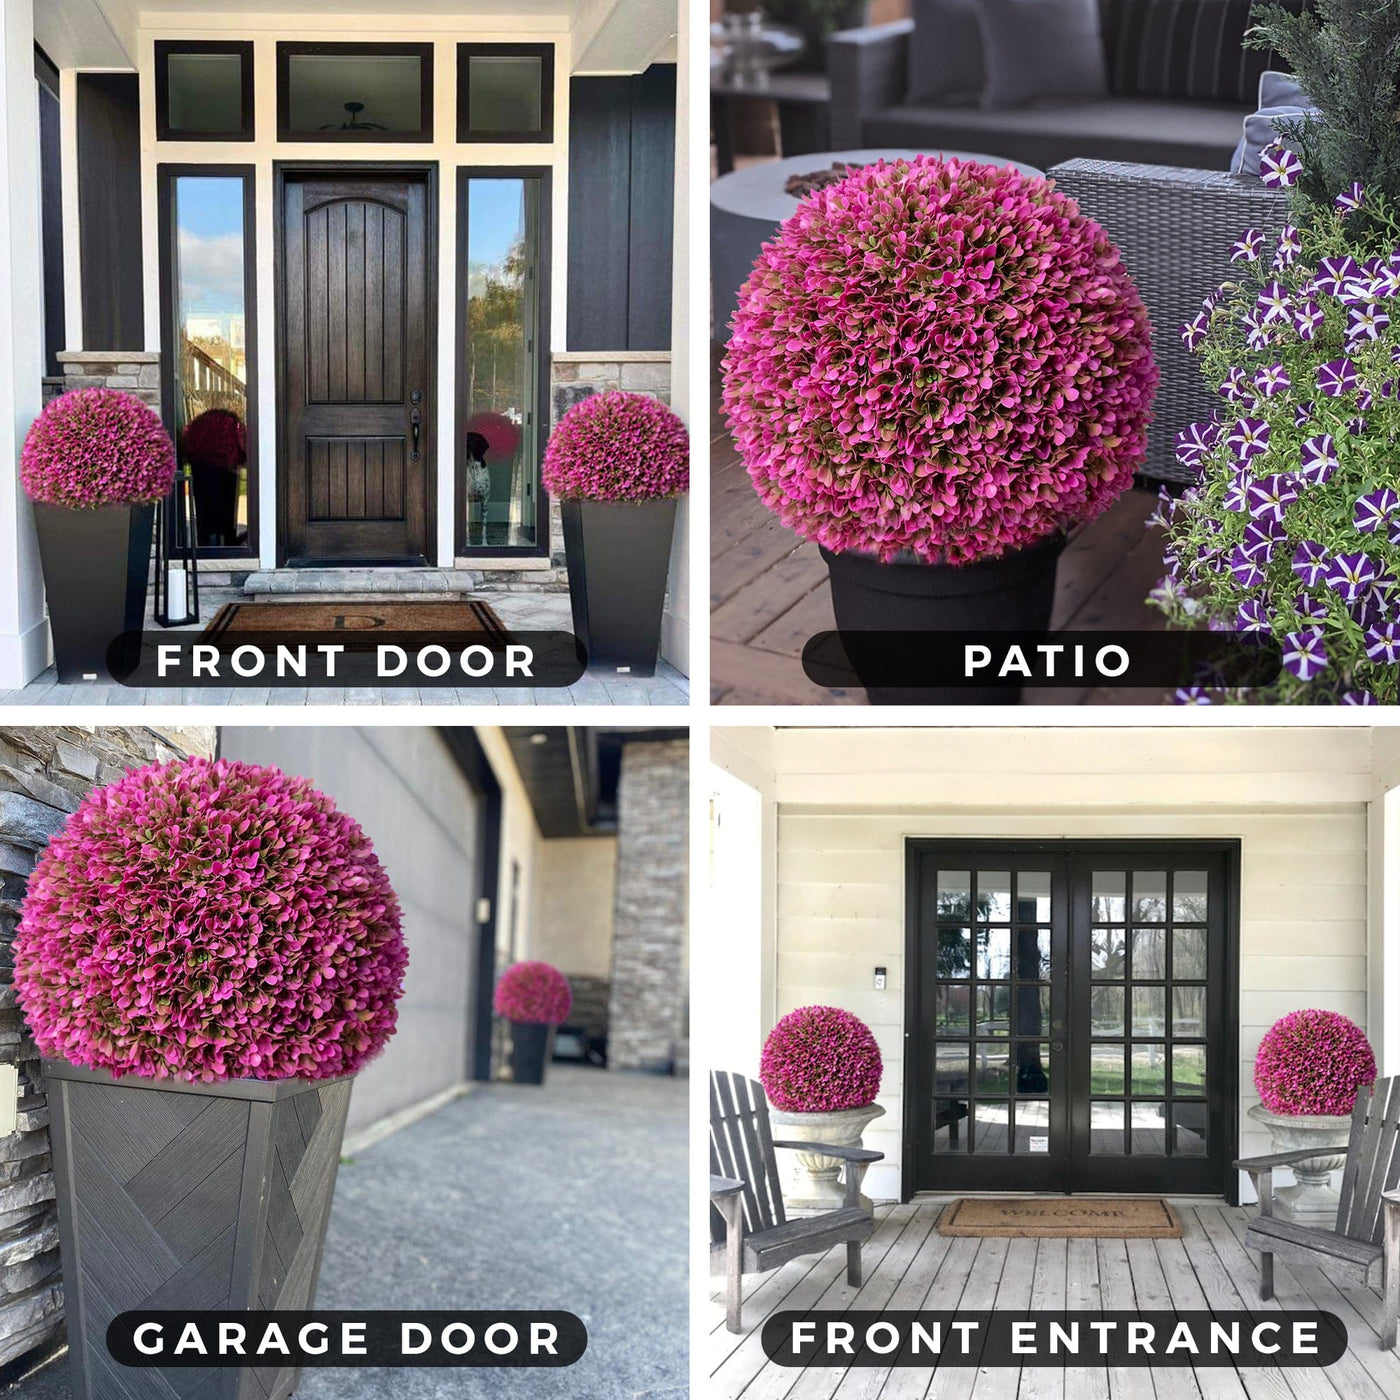 365 Curb Appeal Topiary ball 23" XL Pink Topiary Ball